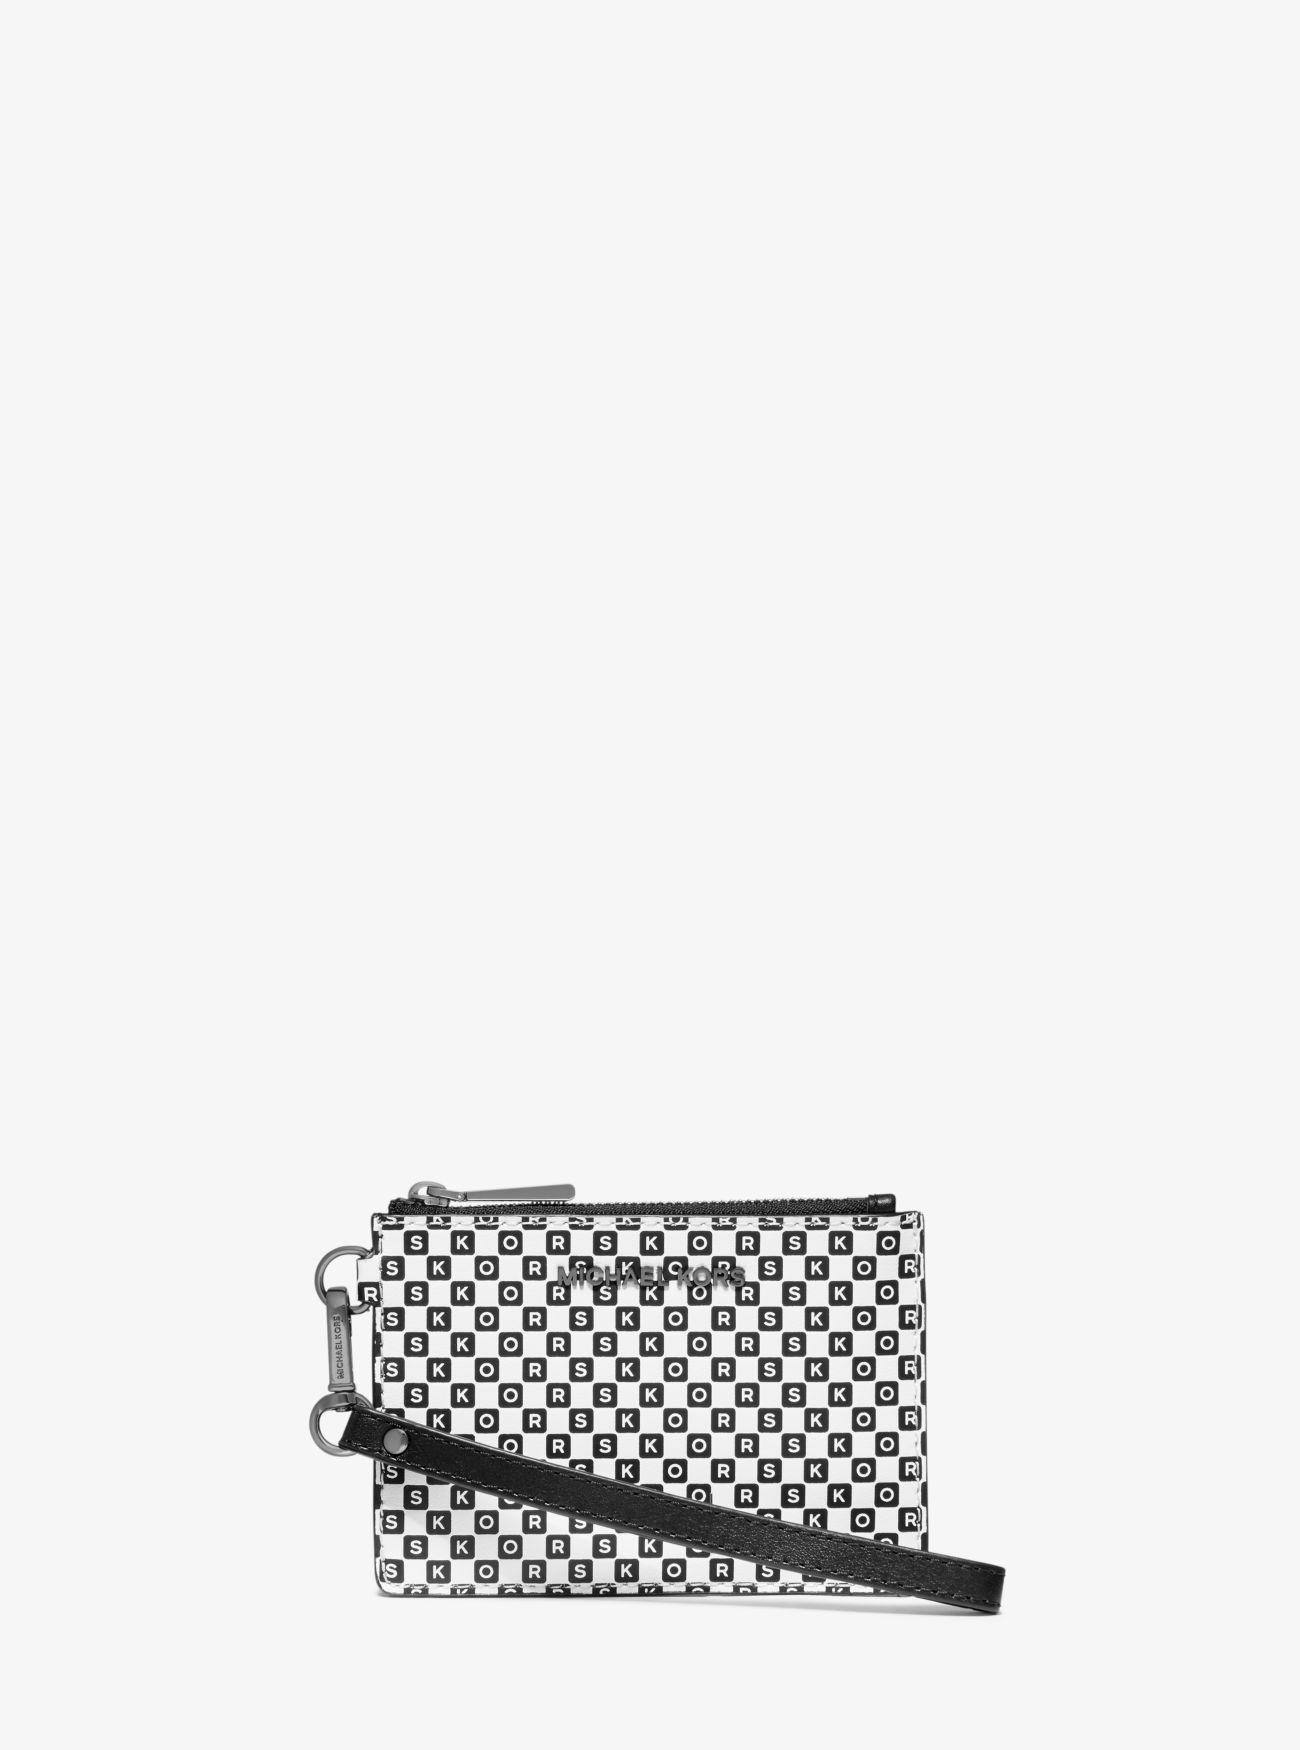 MICHAEL Michael Kors Checkerboard Logo Leather Coin Purse in Black - Lyst